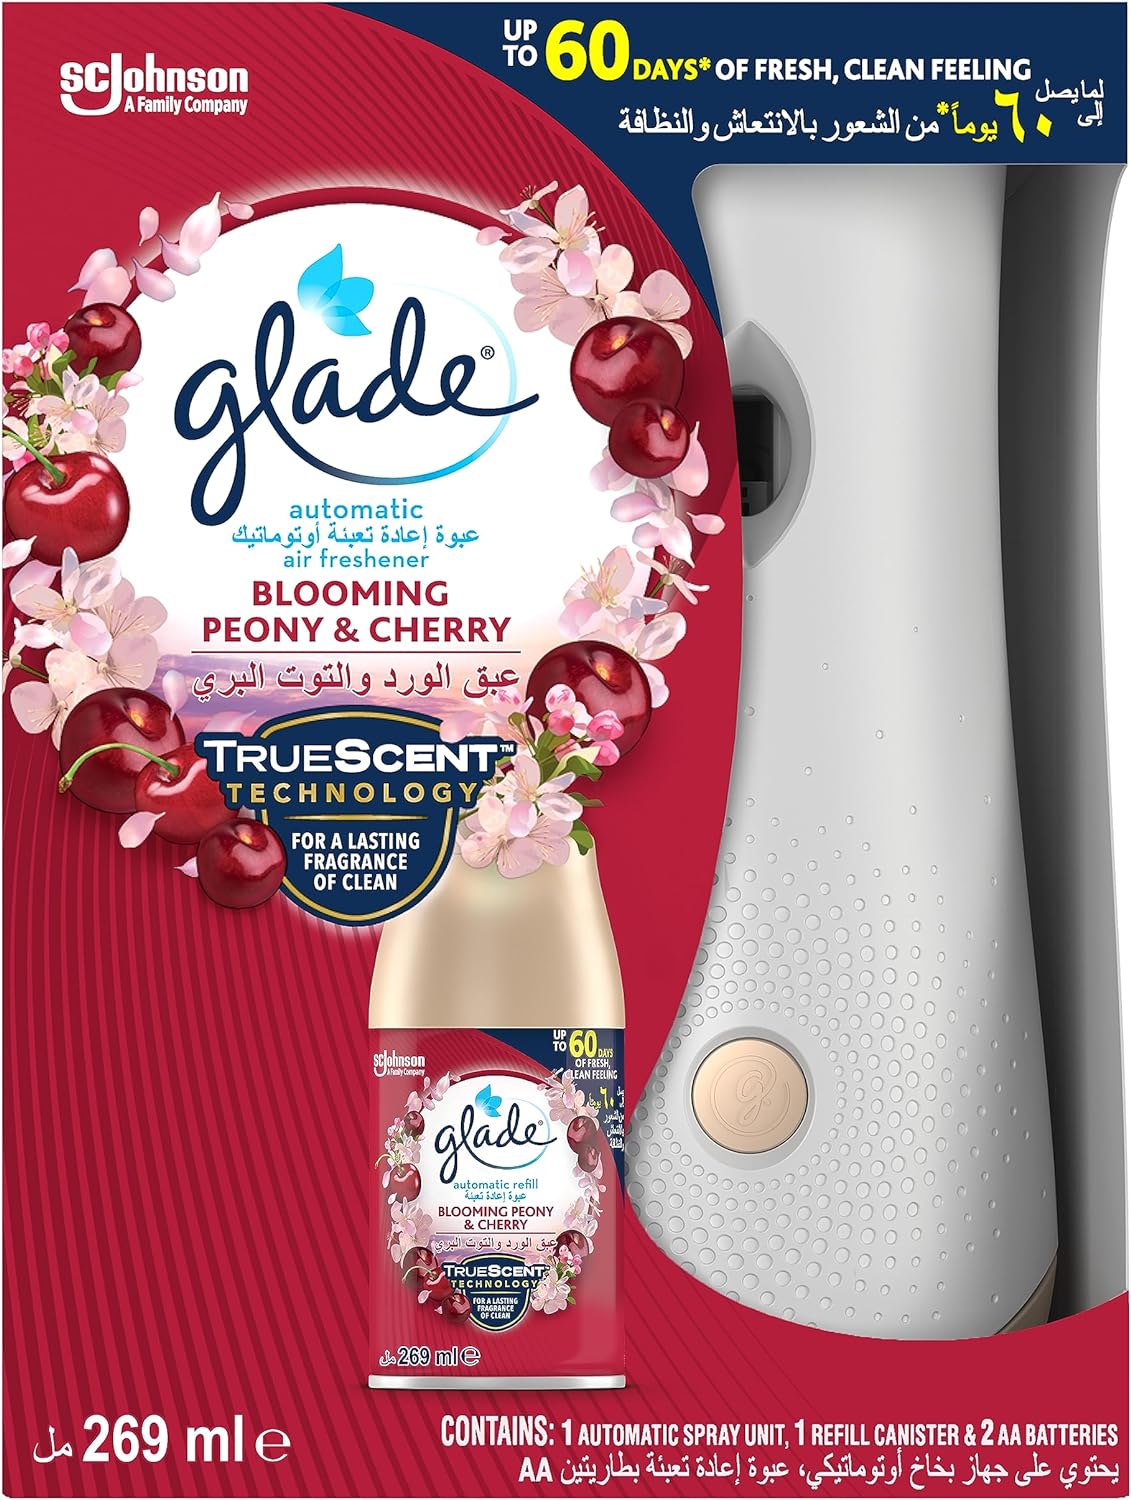 GLADE AUTOMATIC LASTS UP TO 60 DAYS